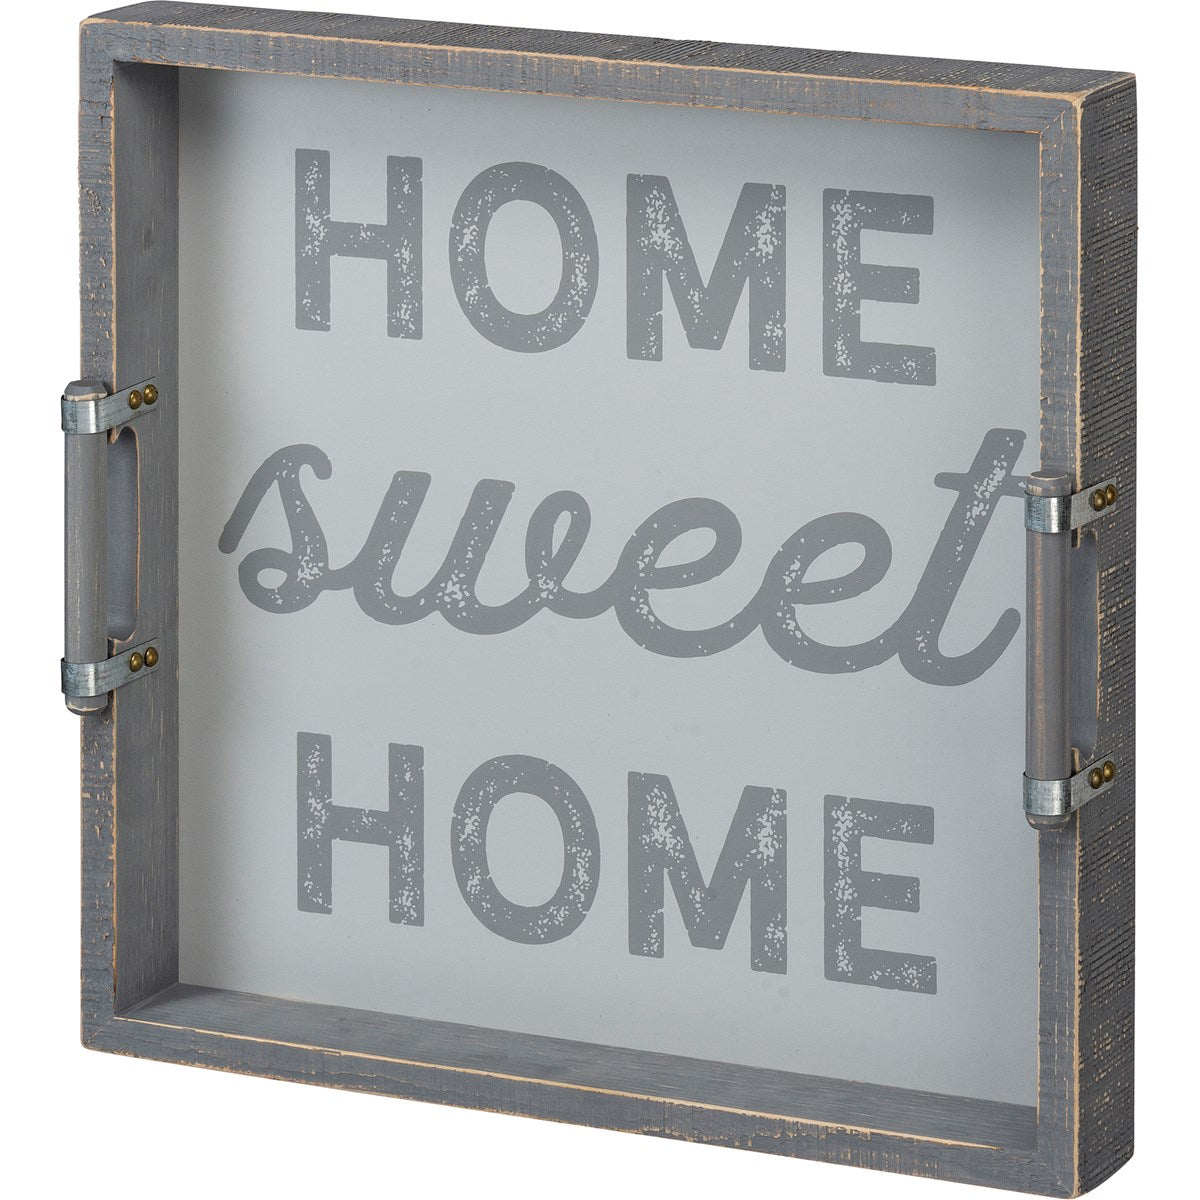 Home Sweet Home - Wooden Serving Tray